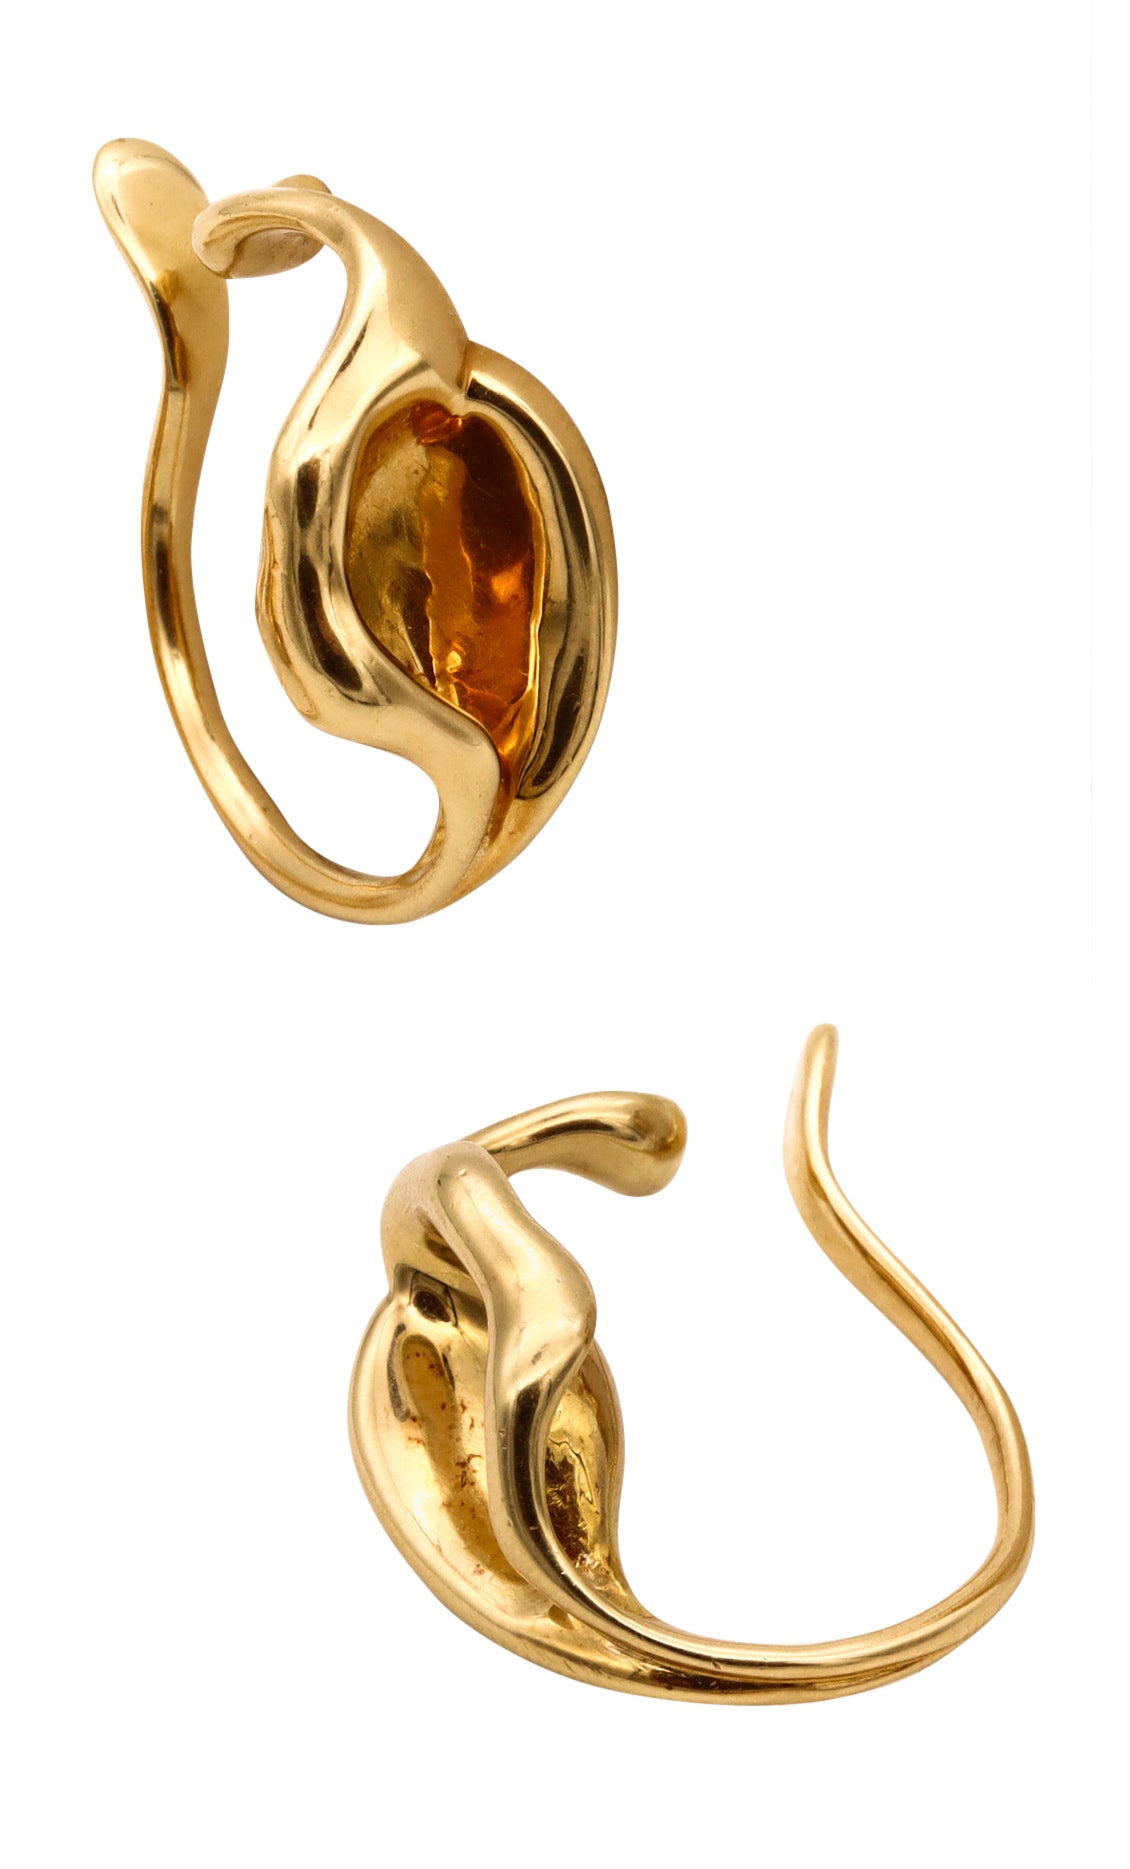 Tiffany Co. By Elsa Peretti Rare Vintage Organic Lilies Earrings In Solid 18Kt Yellow Gold